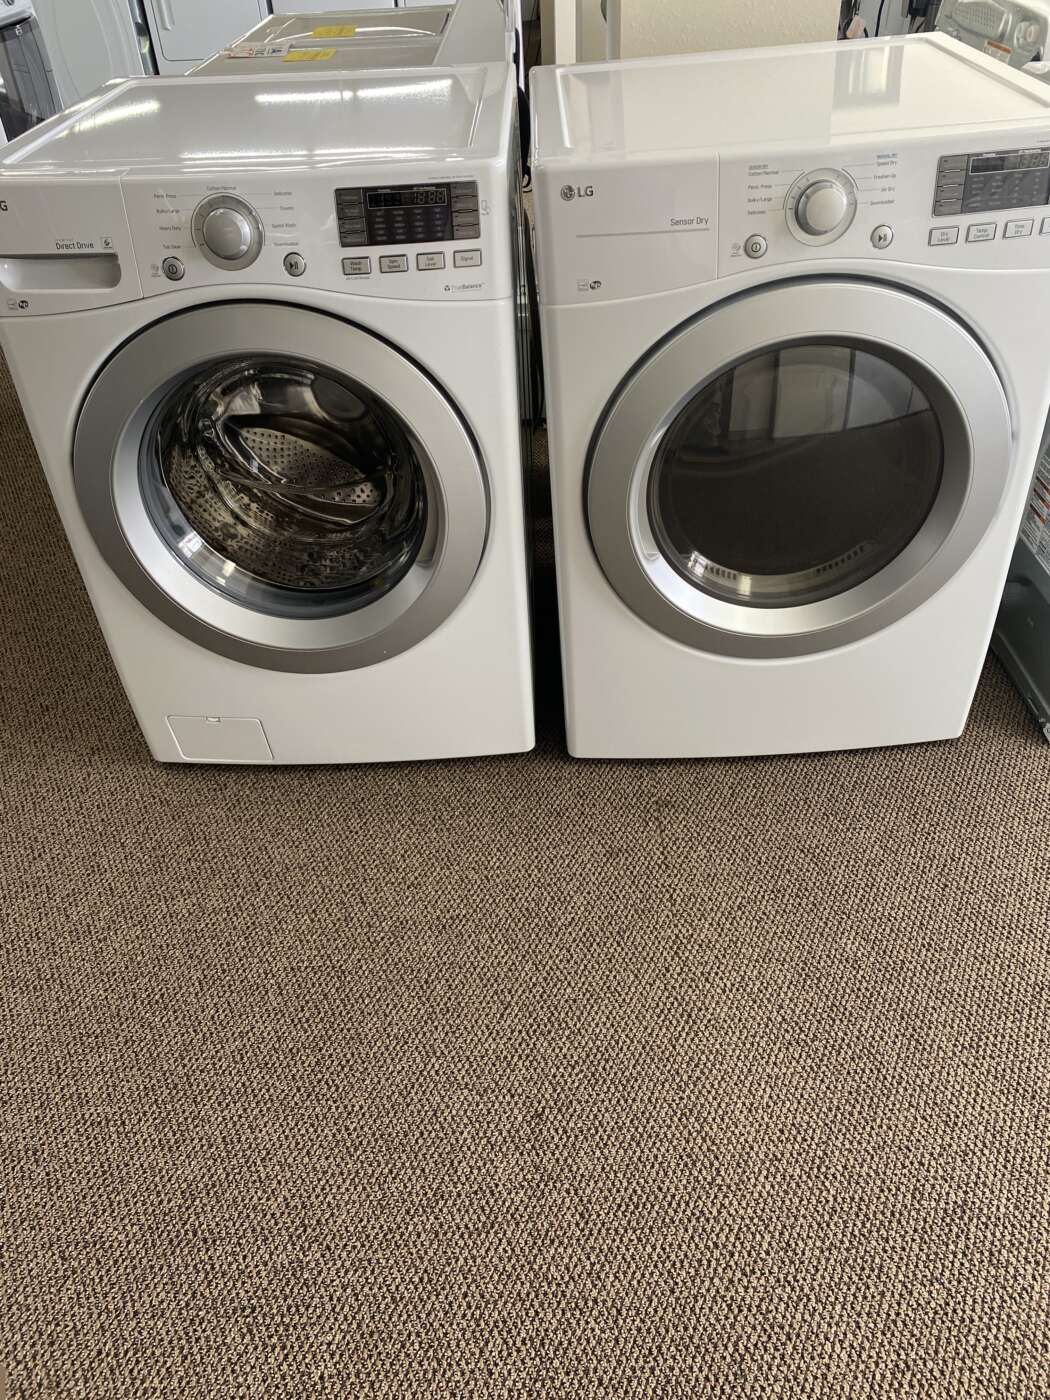 Reconditioned LG 4.5 cu. ft. Washer and 7.4 cu. ft. Dryer Set